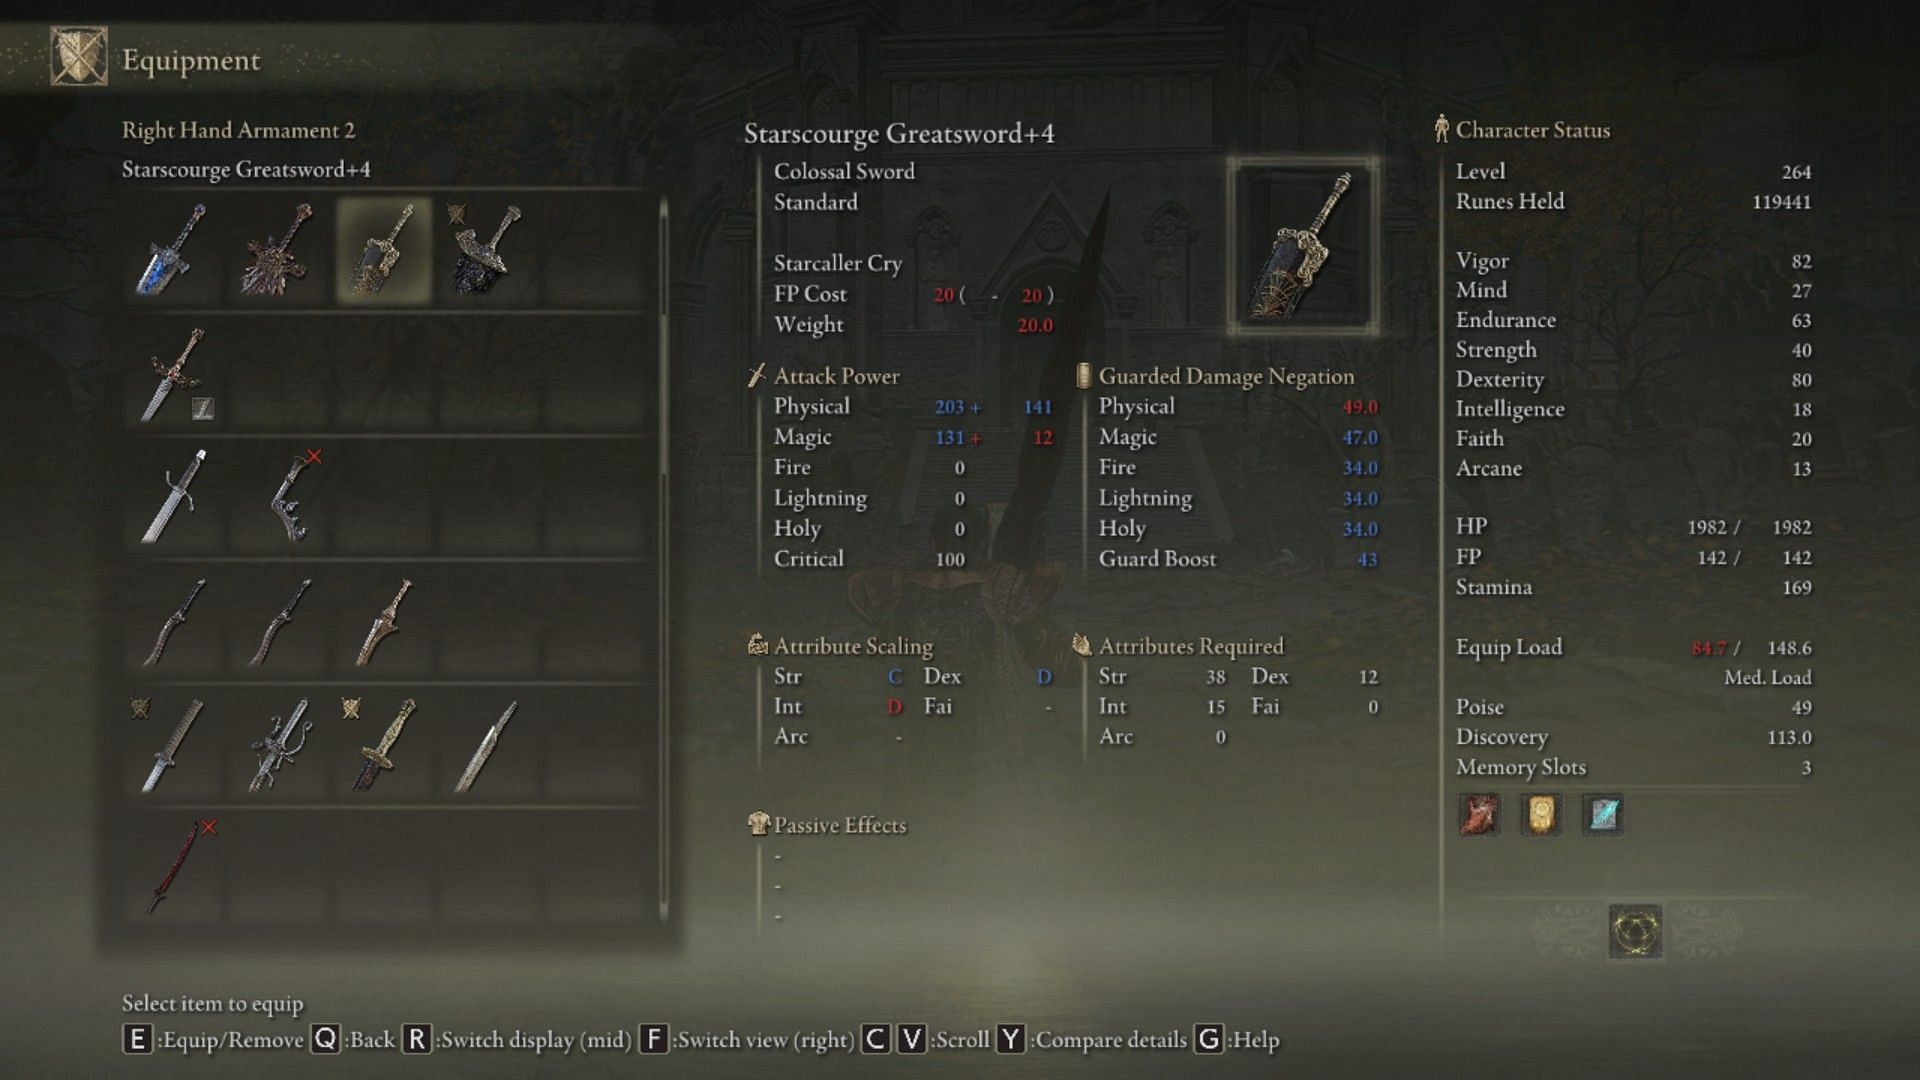 Starscourge Greatsword works extremely good for both crowd control as well as boss damage (Image via Elden Ring)